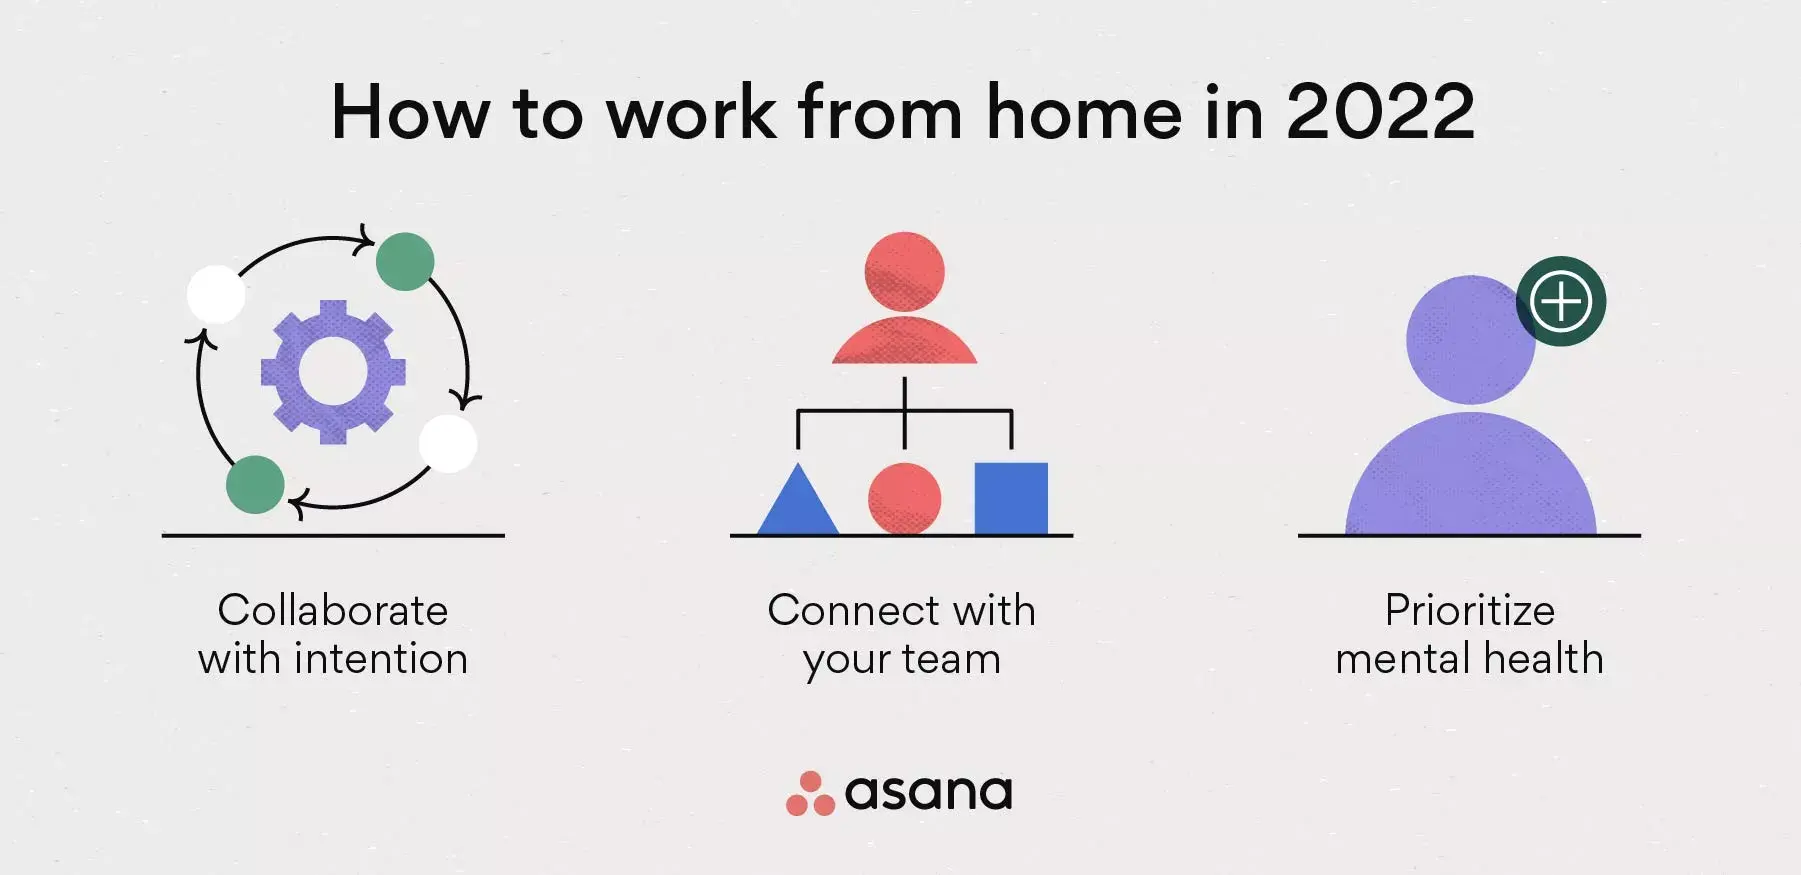 [inline illustration] How to work from home in 2022 (infographic)